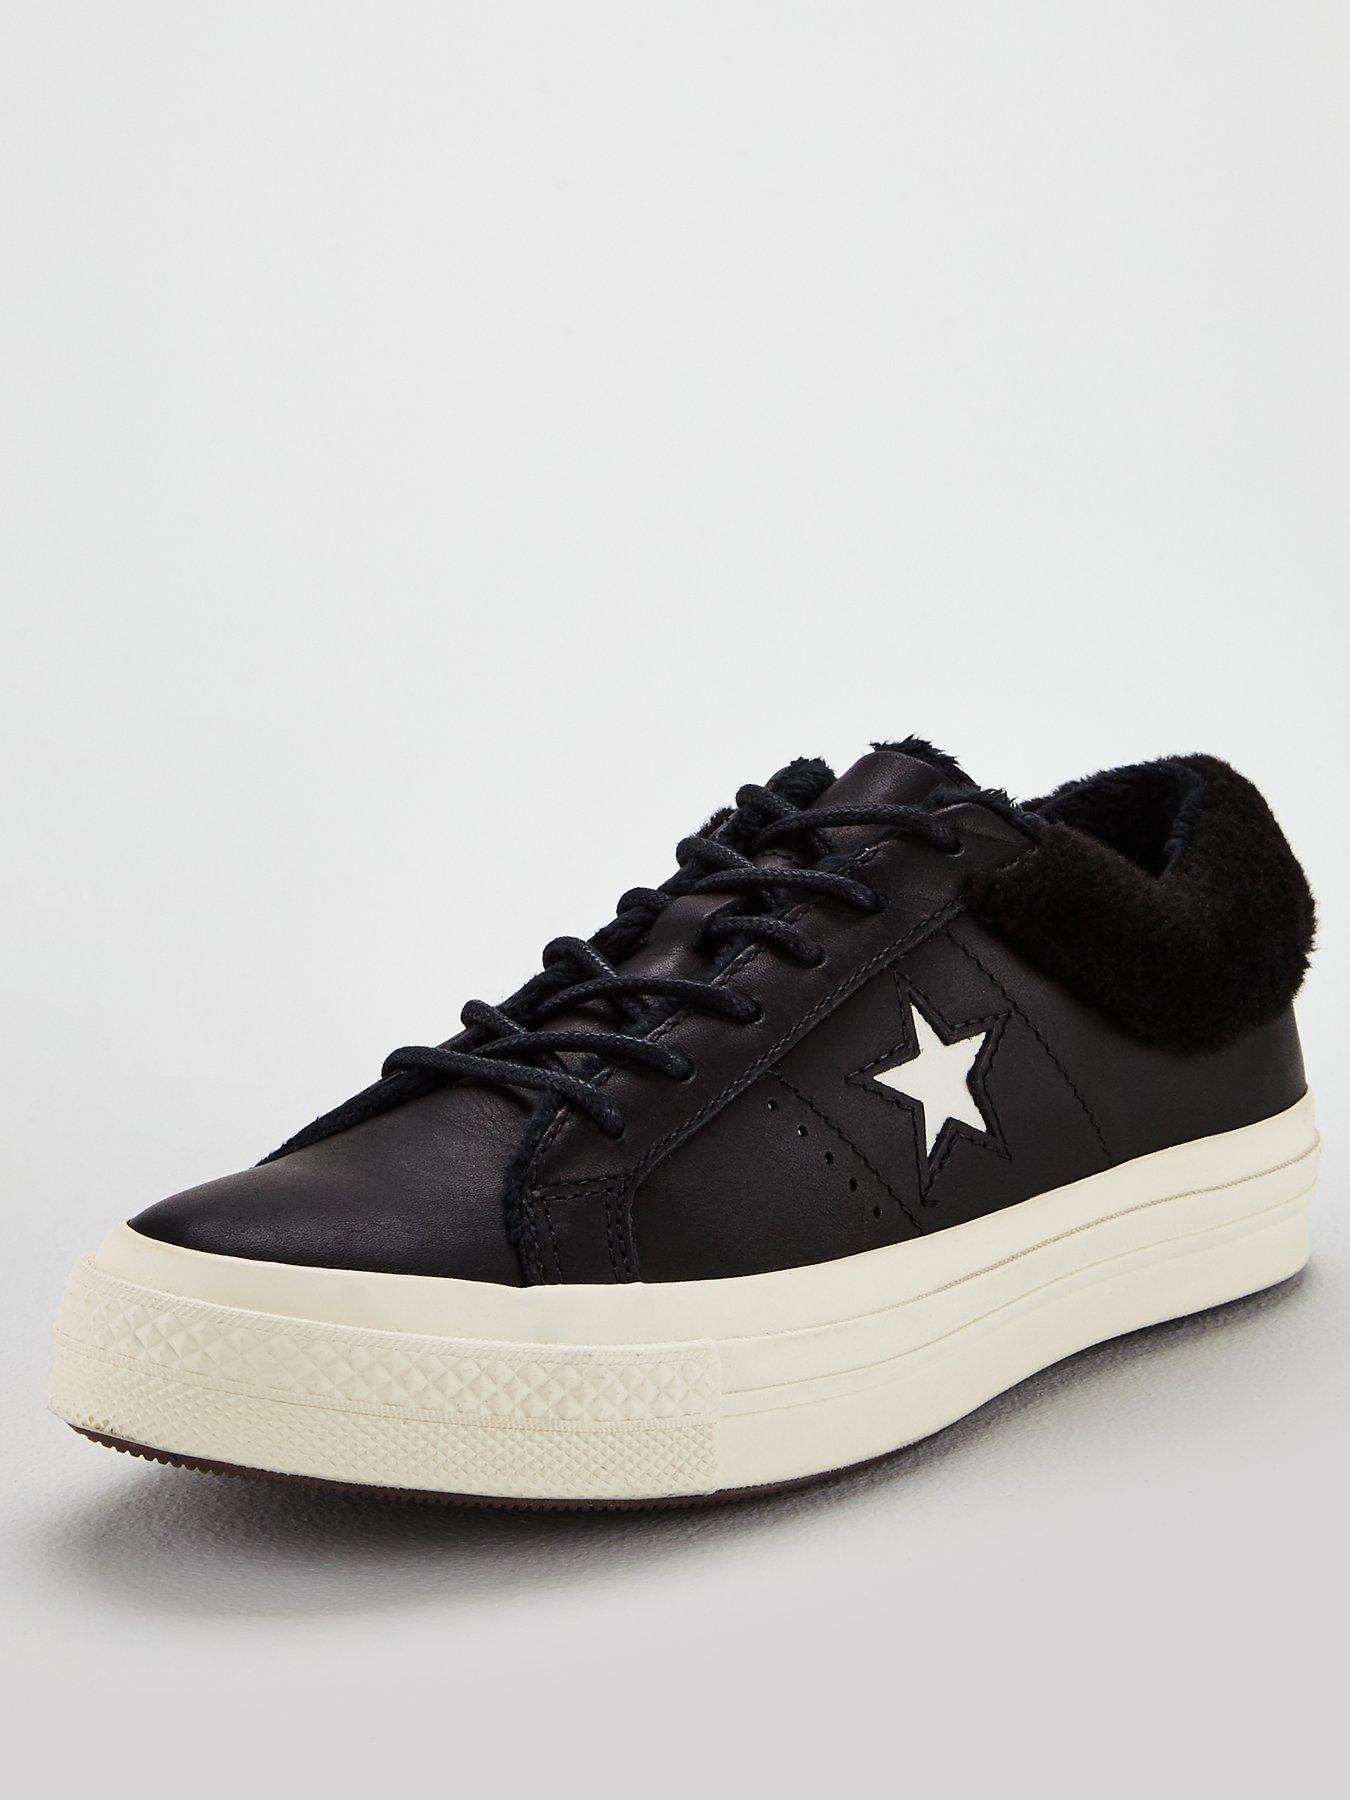 converse one star women's clothing